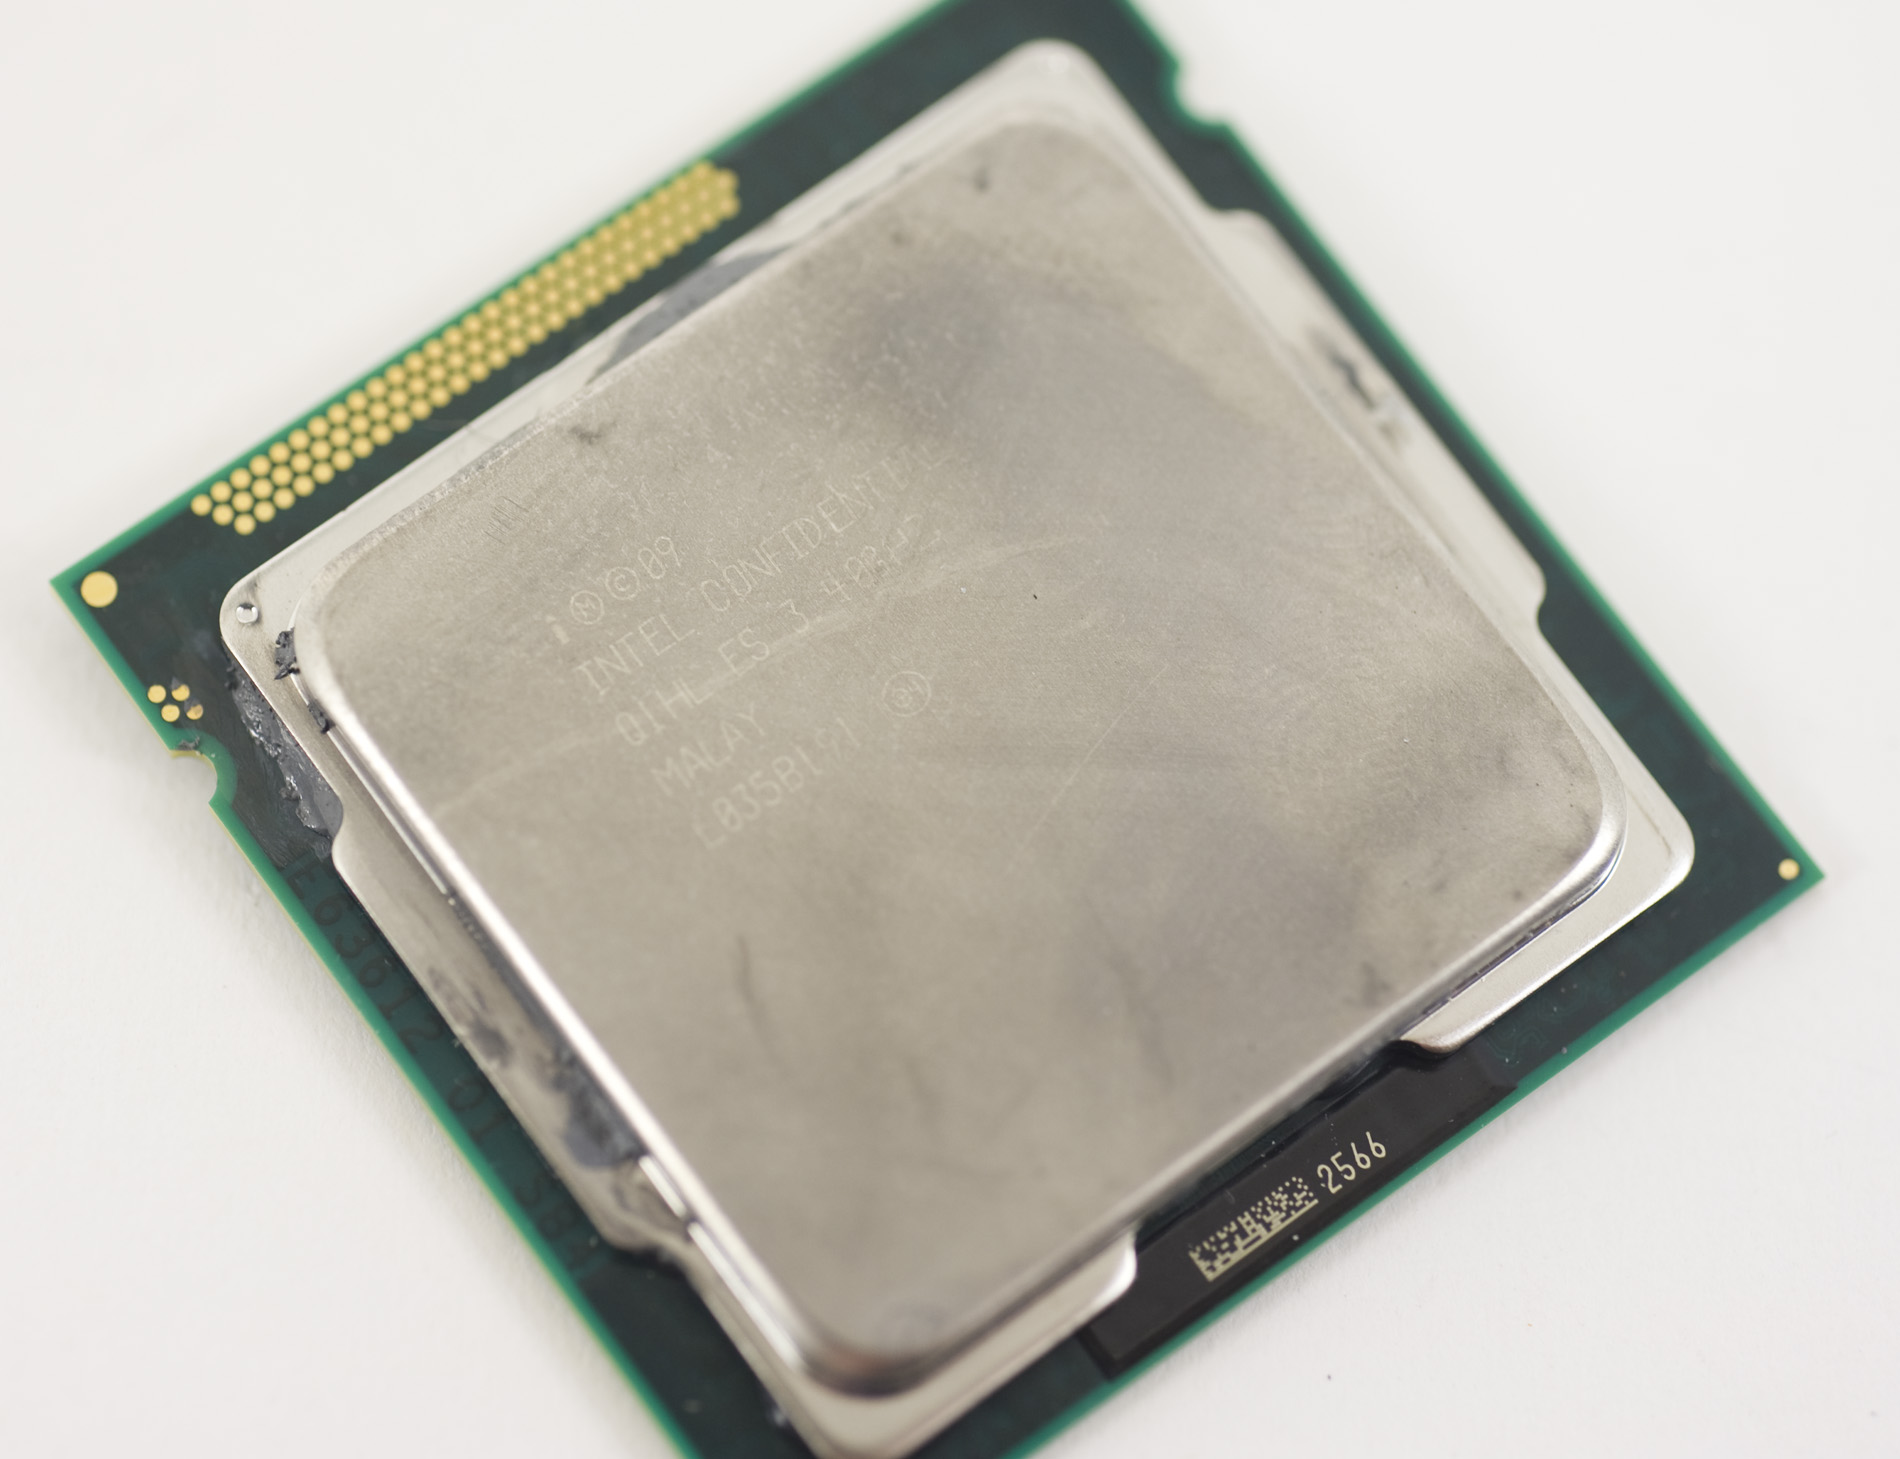 Overclocking: Effortless 4.4GHz+ on Air - The Sandy Bridge Review